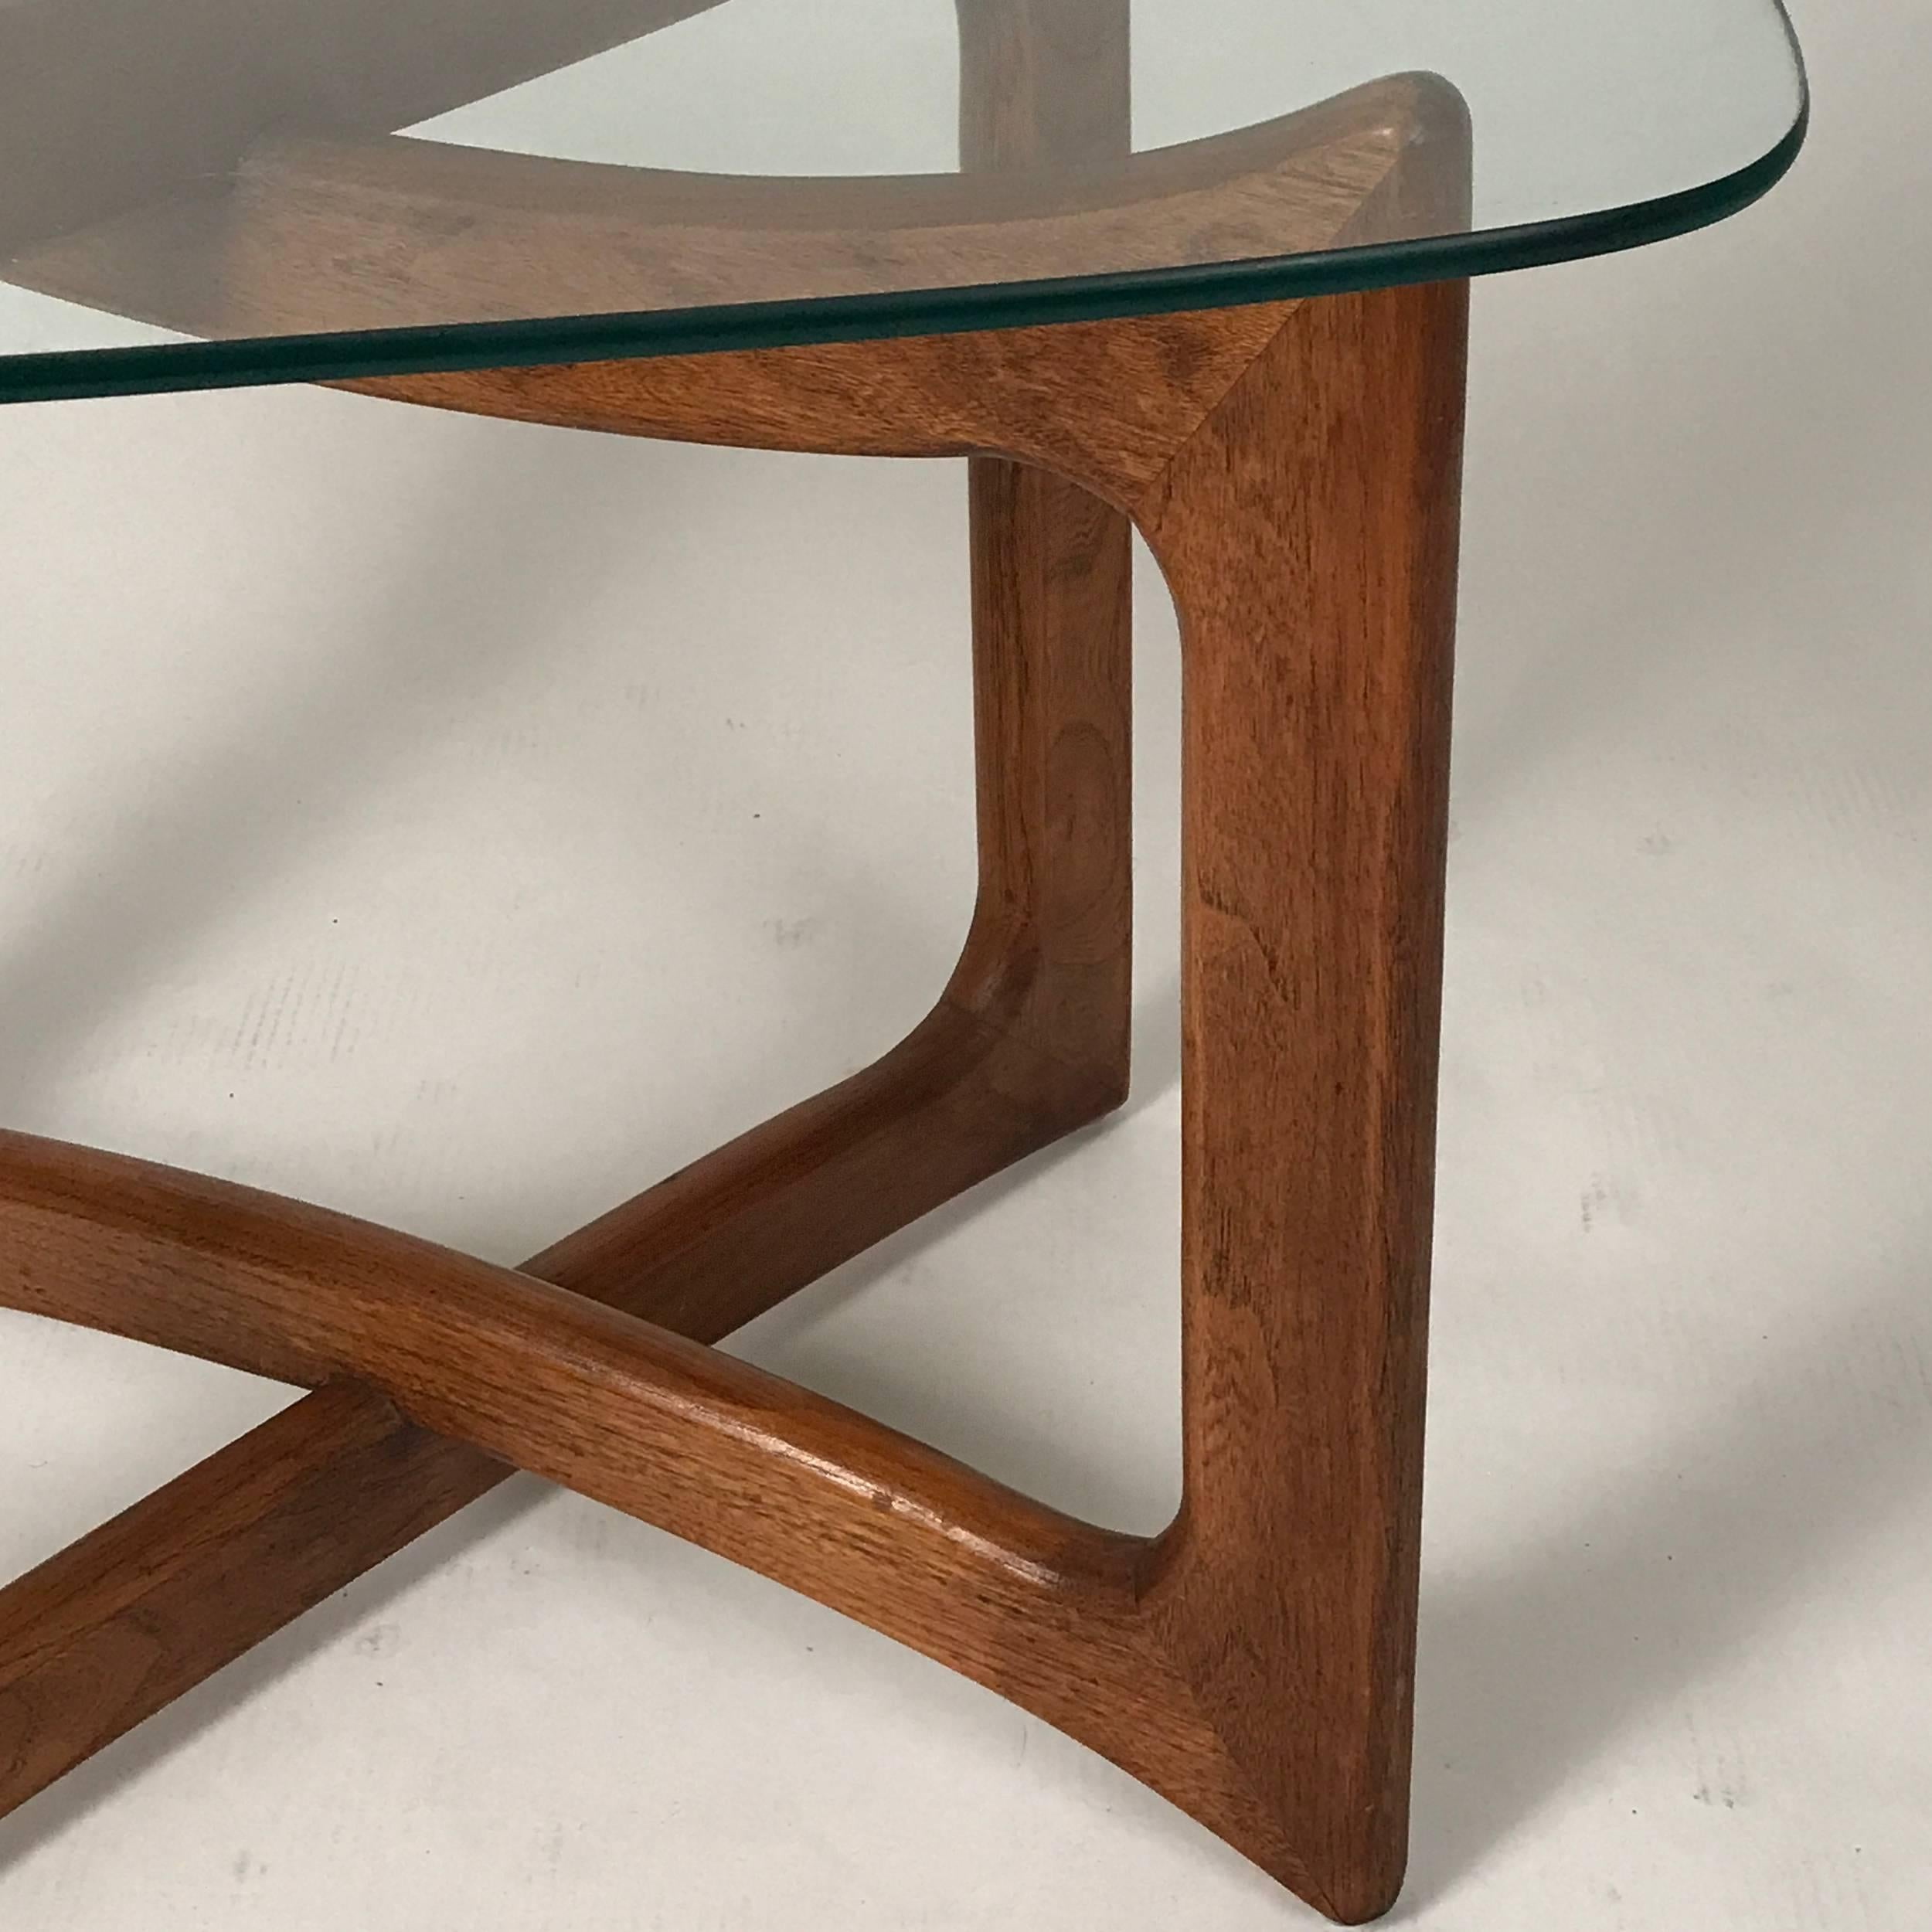 American Sculptural X-Base Adrian Pearsall for Craft Associates Walnut and Glass Table